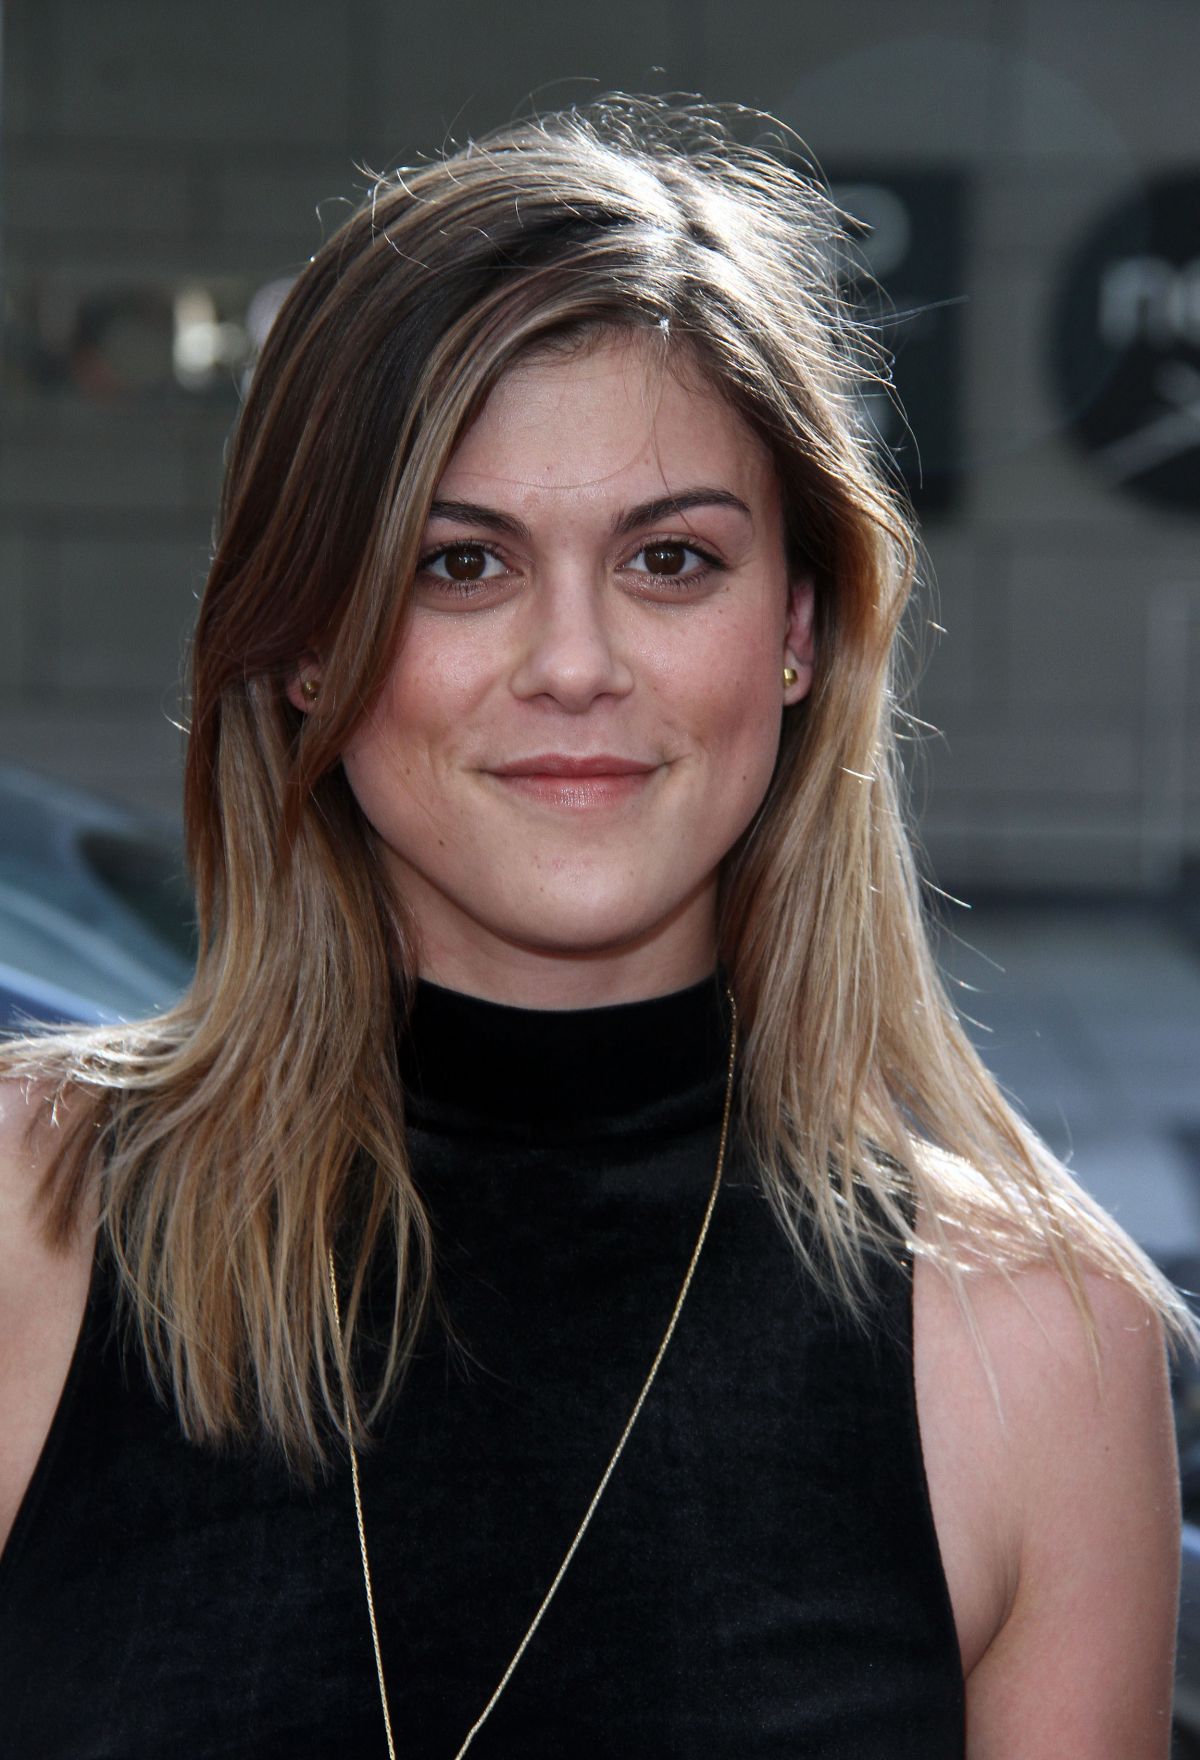 lindsey-shaw-young